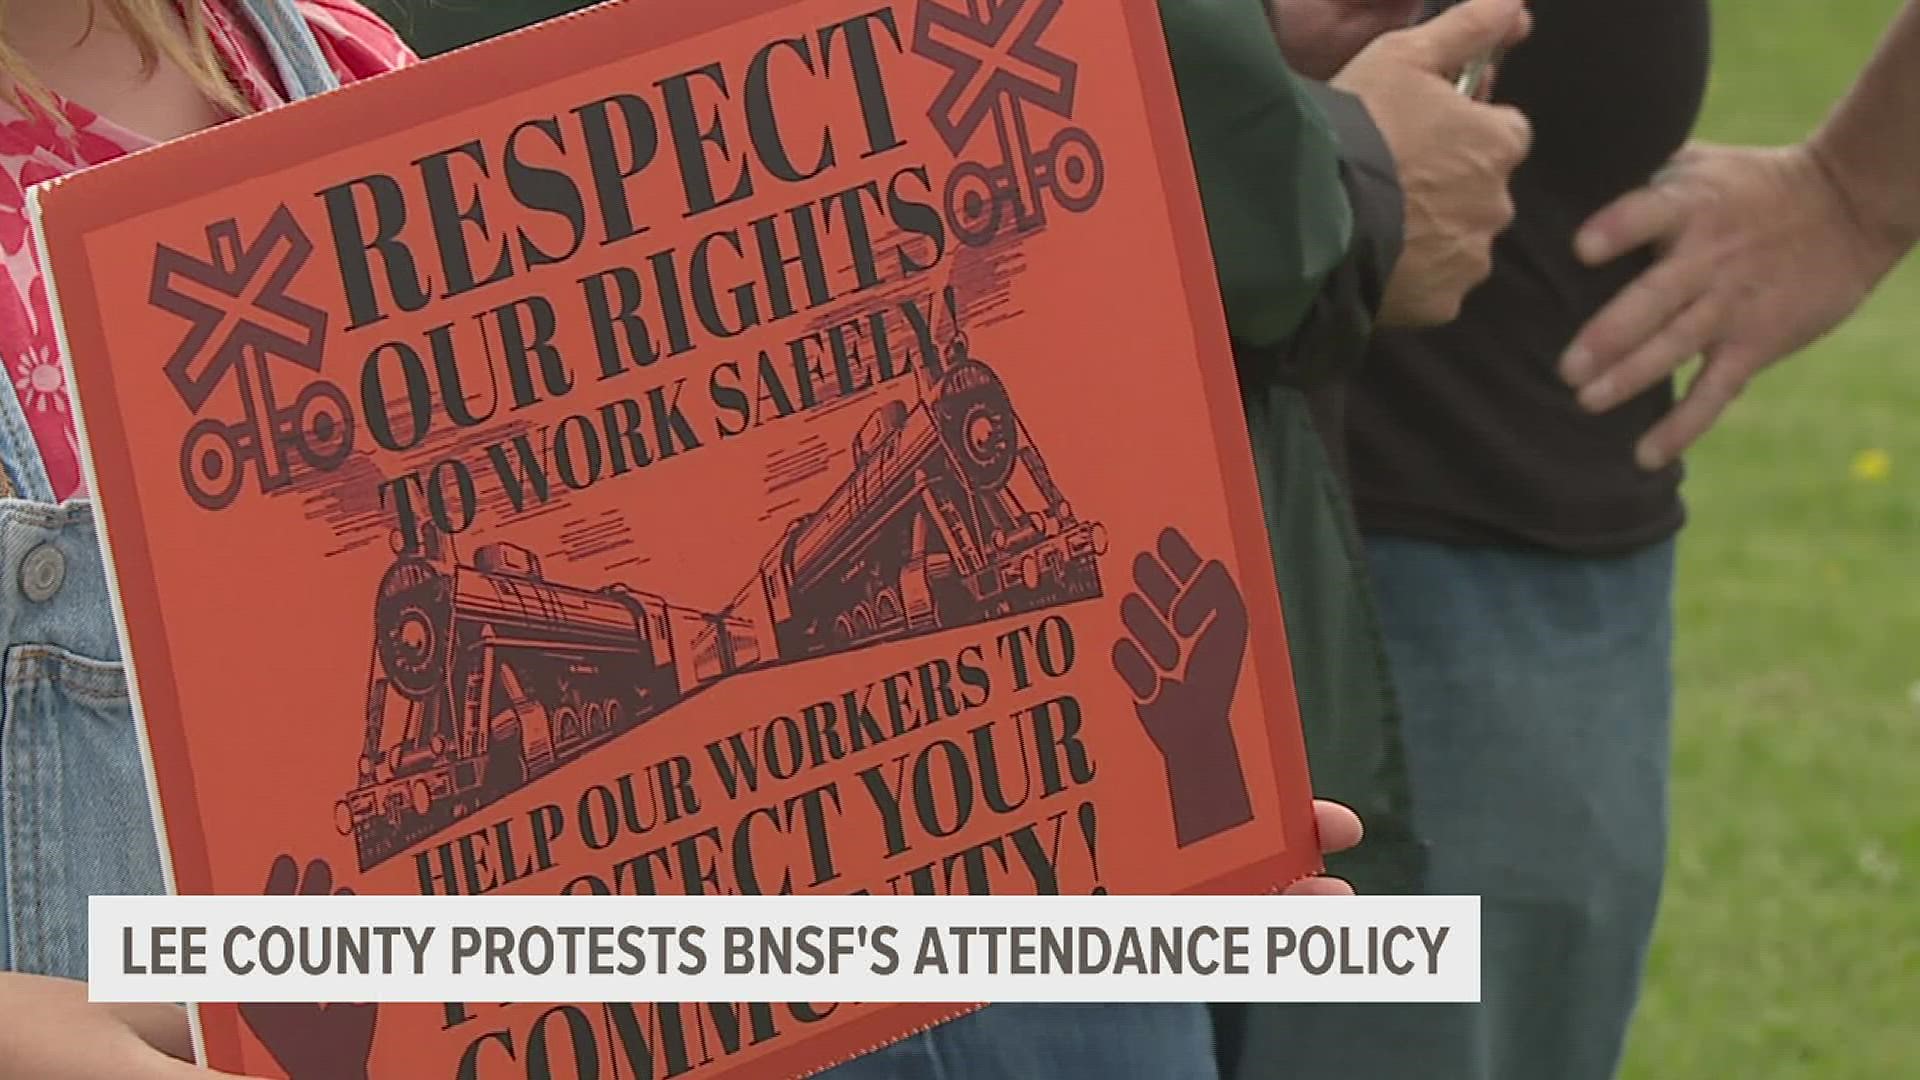 A group rallied in Fort Madison to protest a controversial attendance policy at BNSF that workers say makes it harder to have days off.